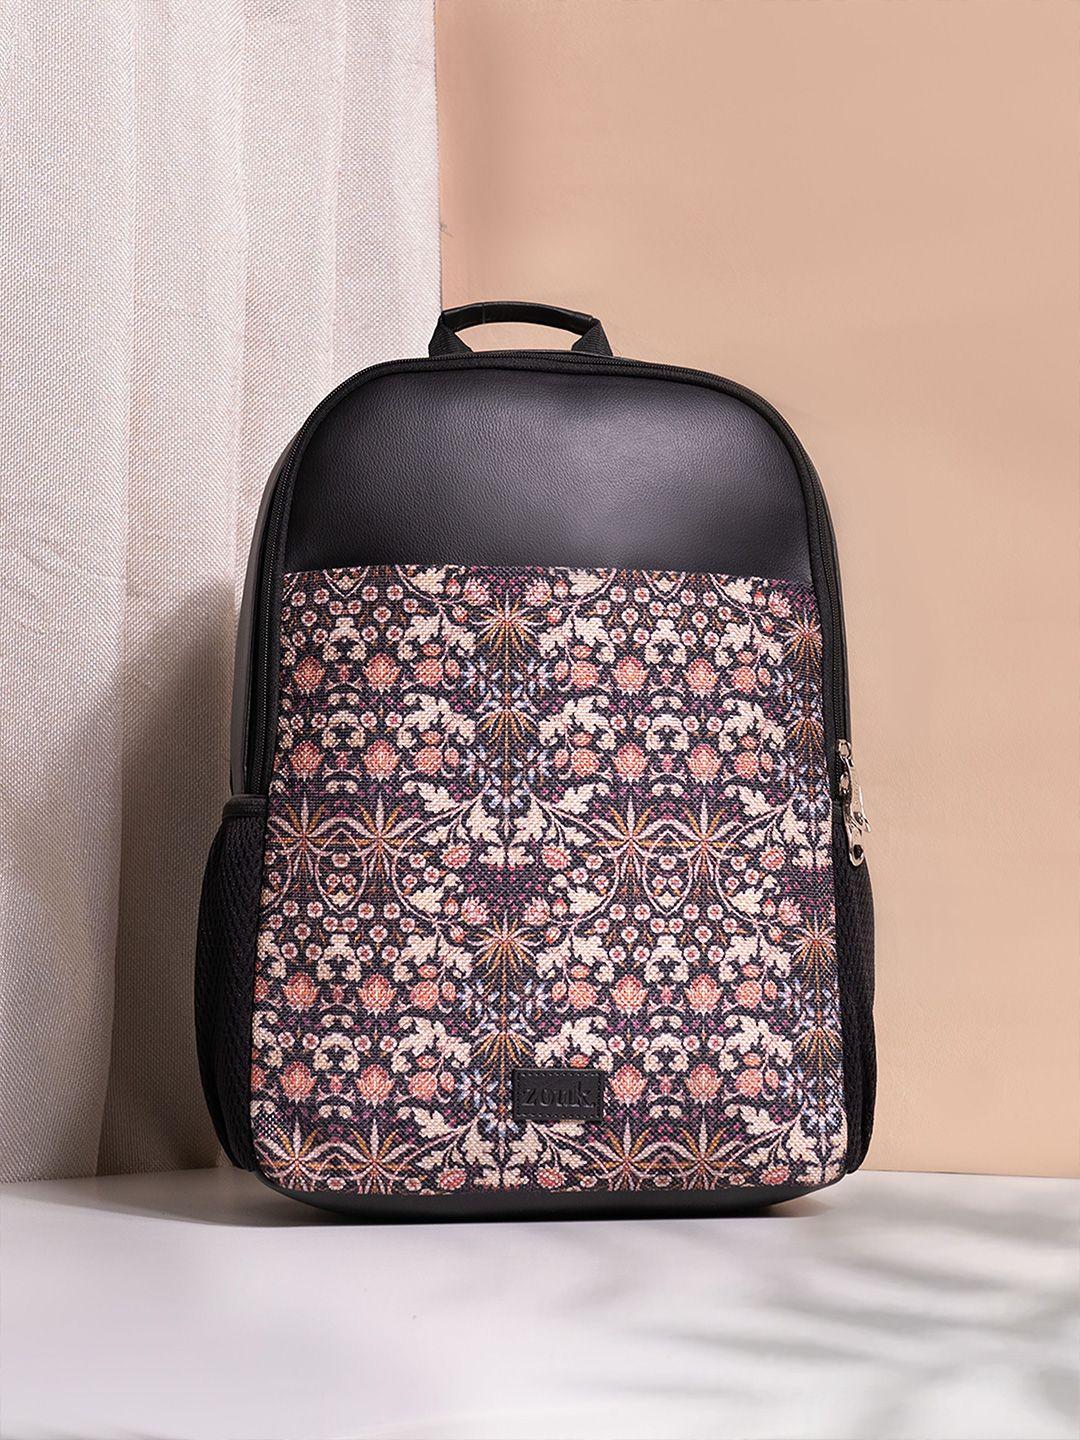 zouk printed backpack with compression straps